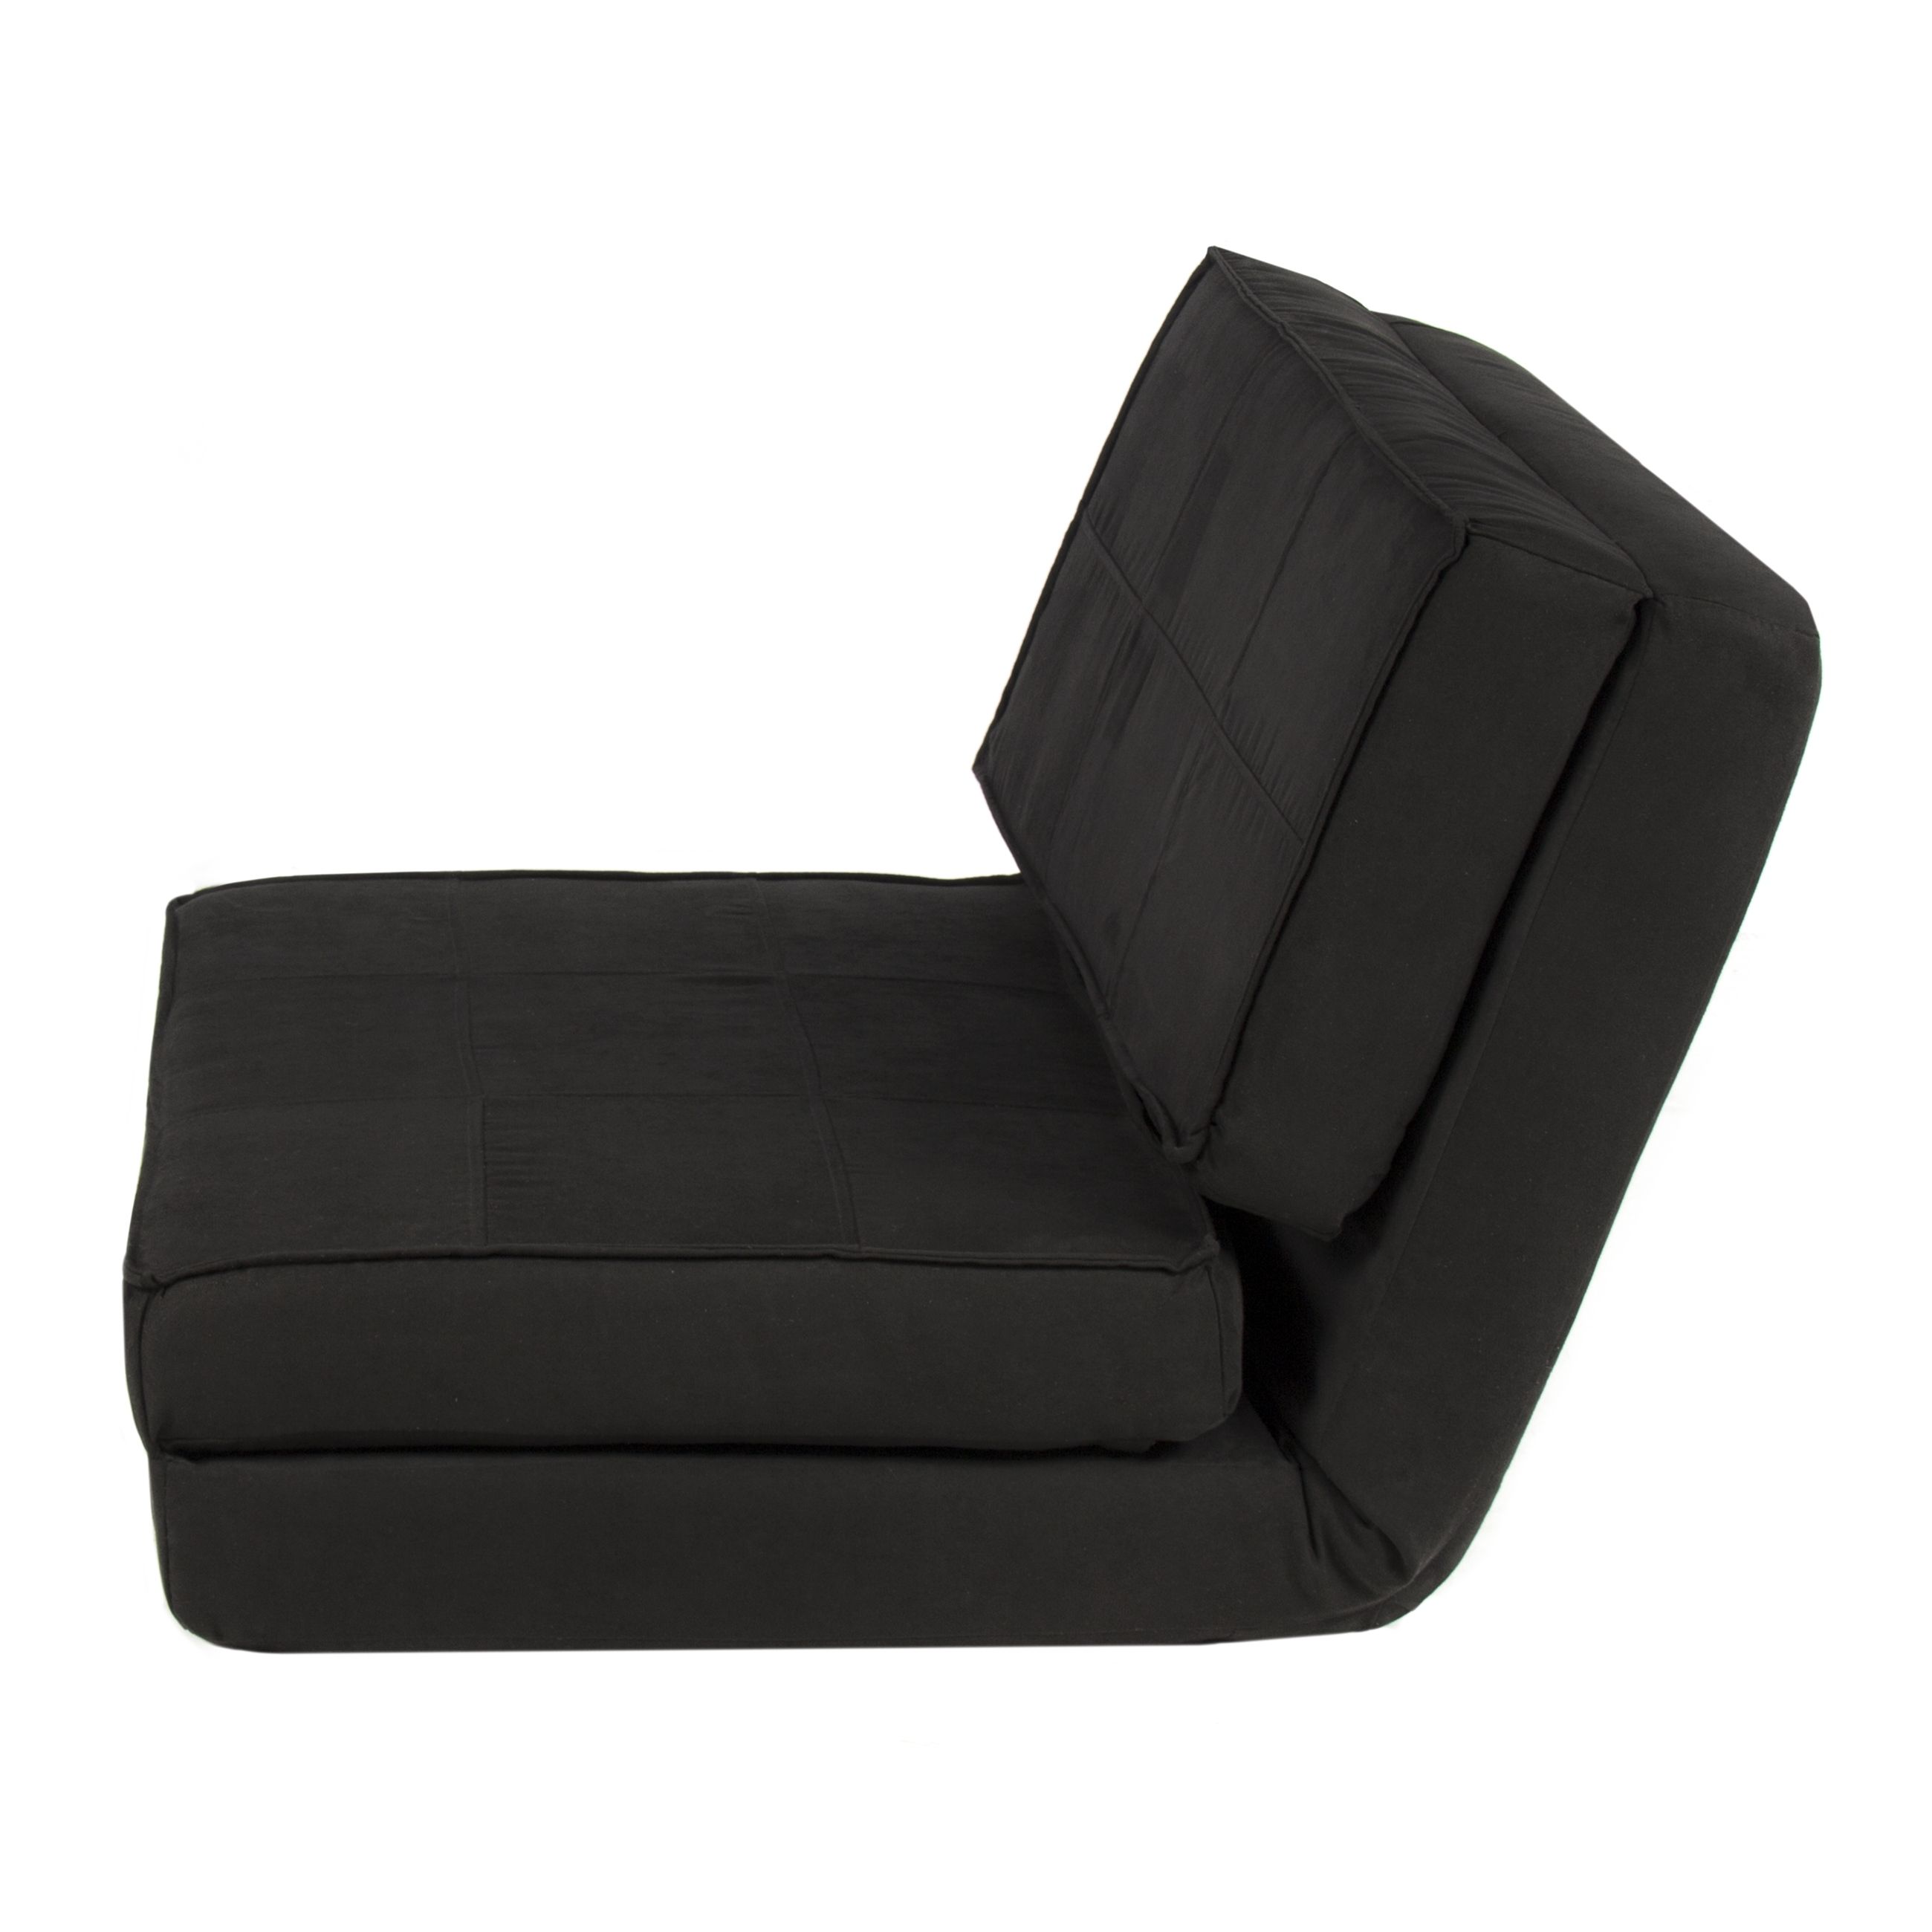 Folding Sofa Chairs In Most Recent Best Choice Products Convertible Sleeper Chair Bed (black (View 7 of 15)